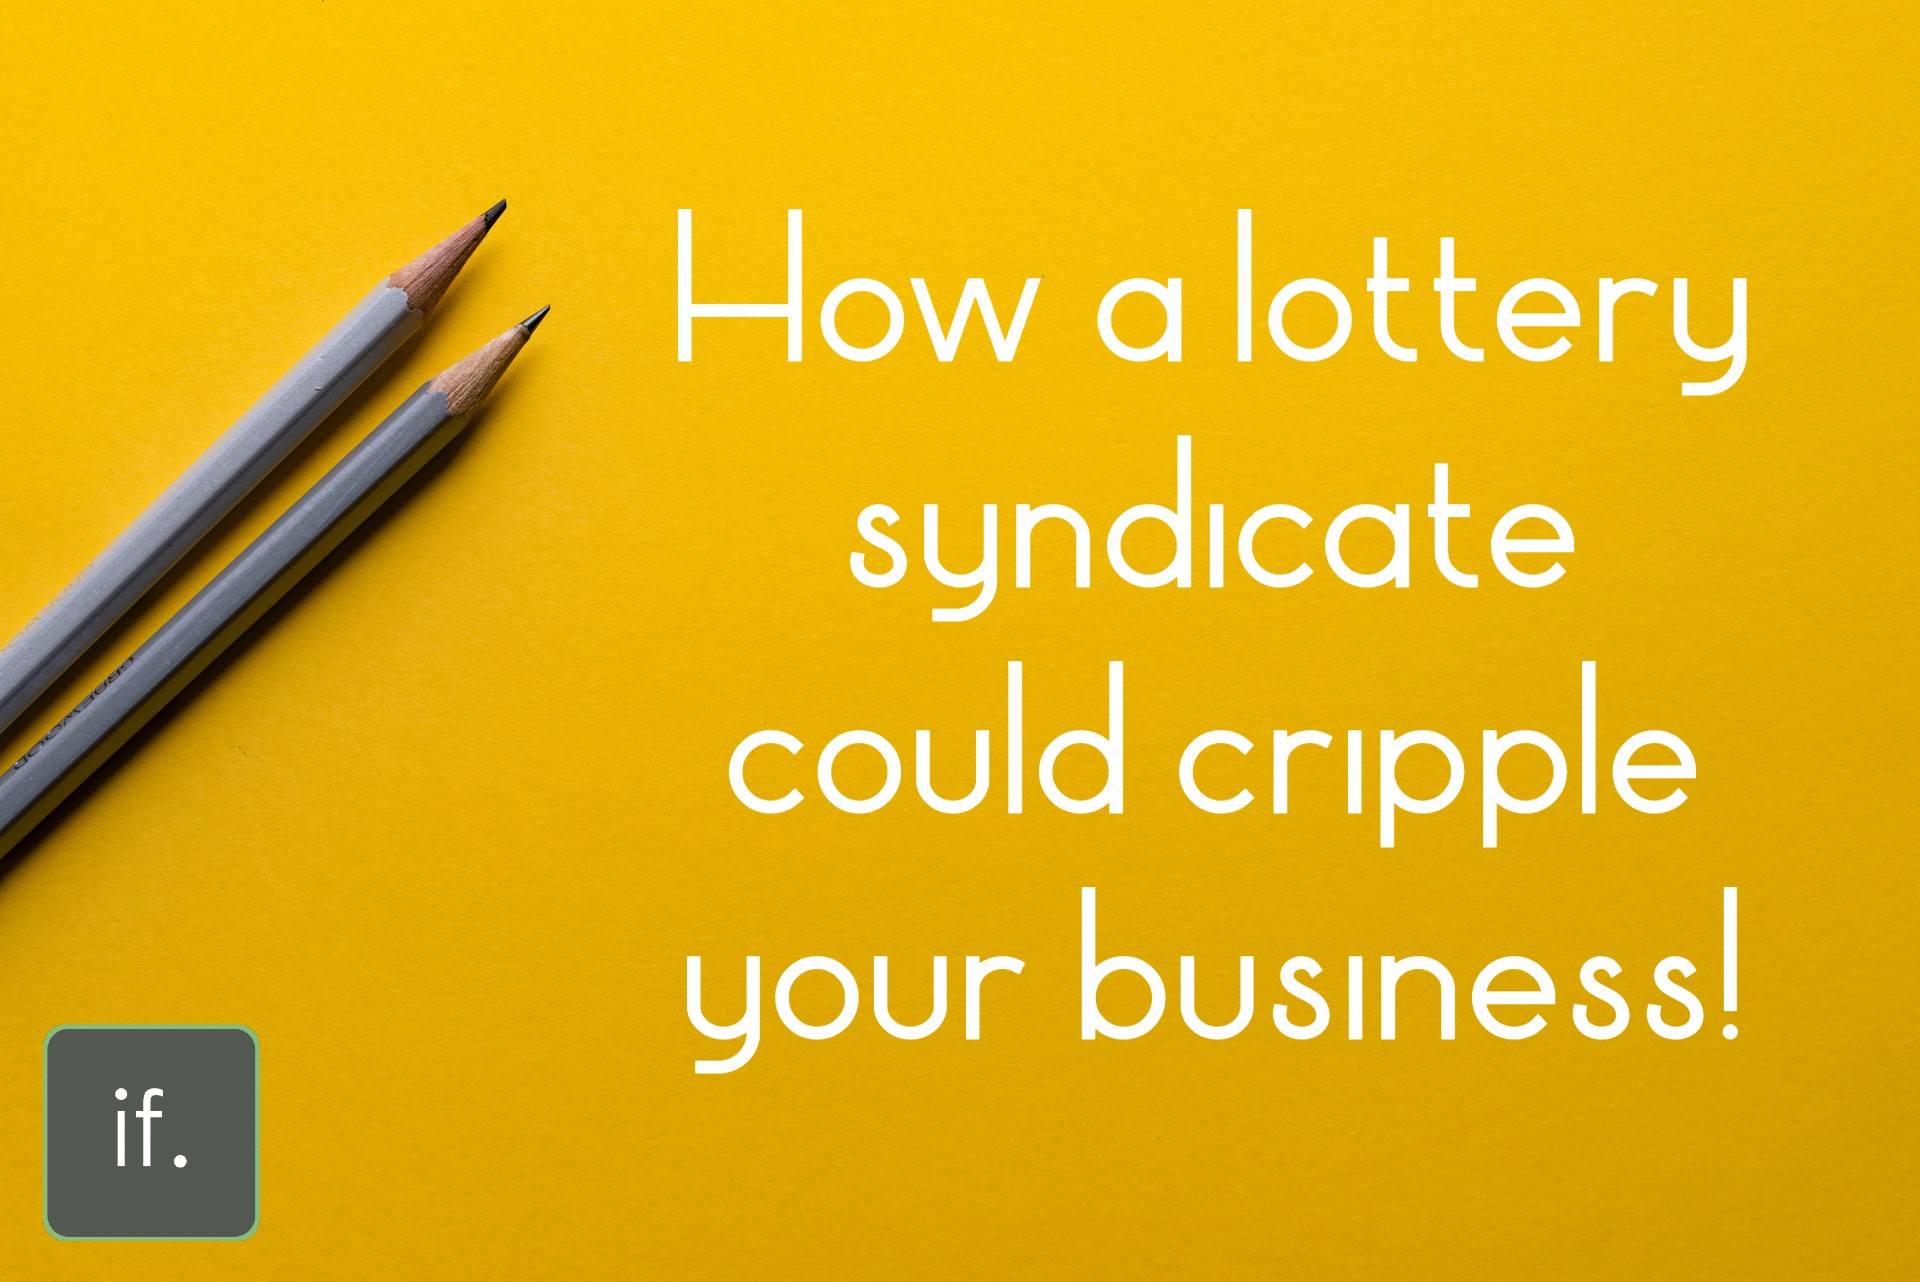 A Lottery Win could cripple your Business